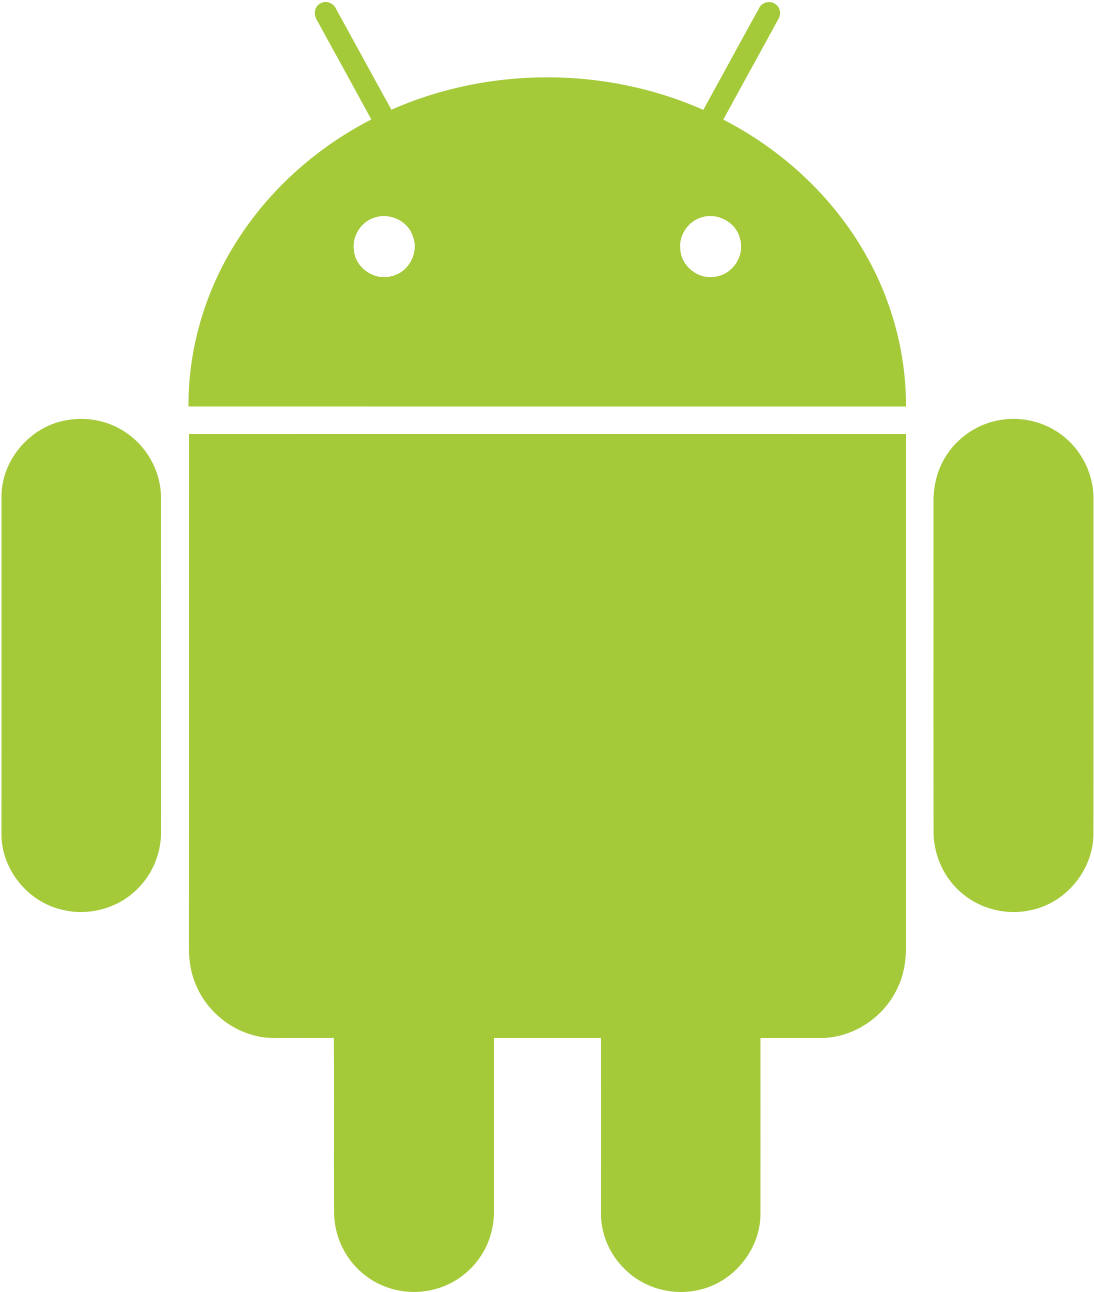 Free Cell Phone Spy App, Mobile Spy App - Android Logo Svg (2048x1536)